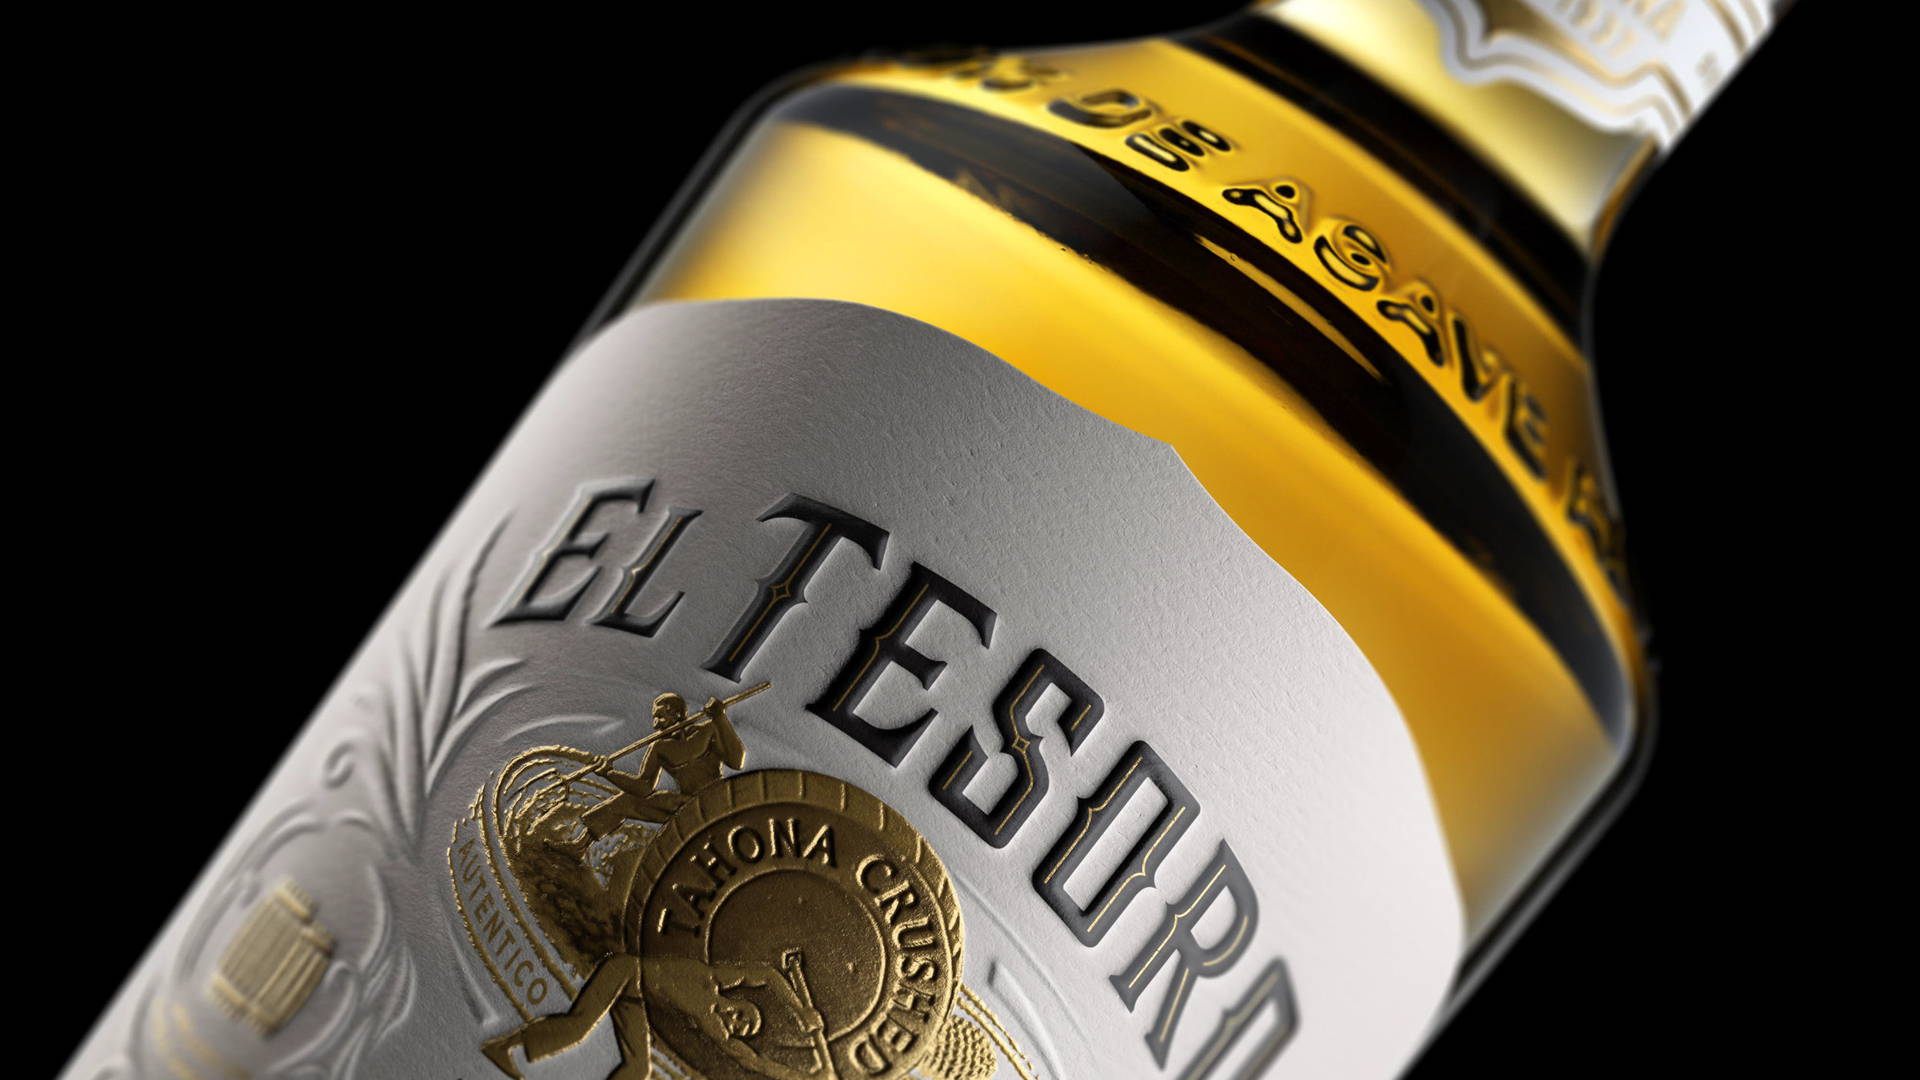 Featured image for El Tesoro's Range Gets a New Look Inspired By The Tequila Making Process